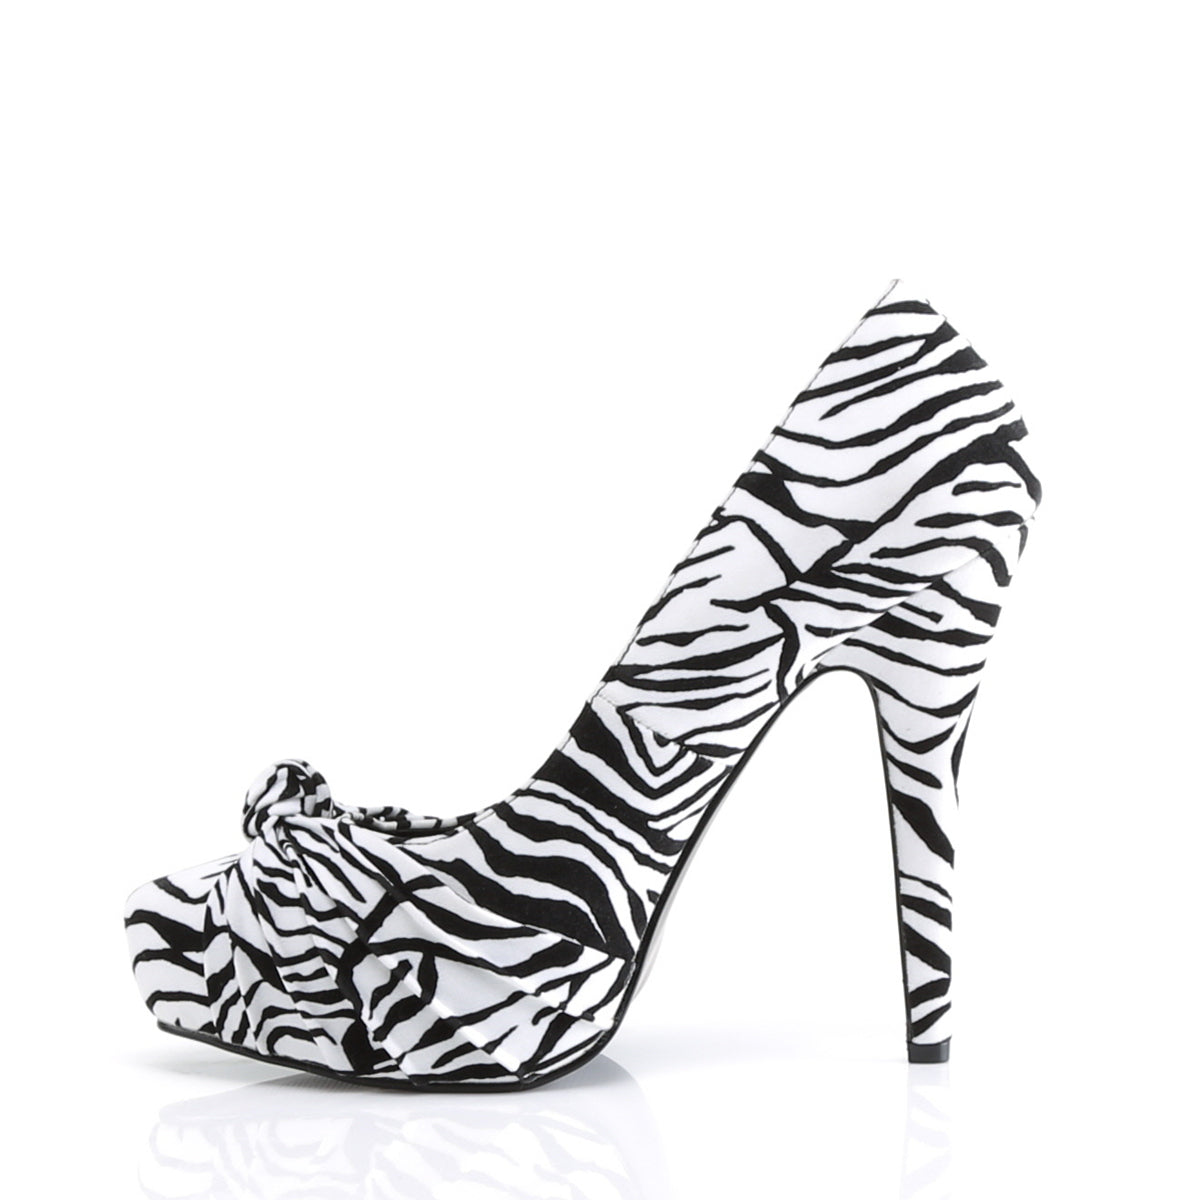 SAFARI-06 Pin Up Couture Black White Zebra Print Platforms-Pin Up Couture- Sexy Shoes Pole Dance Heels